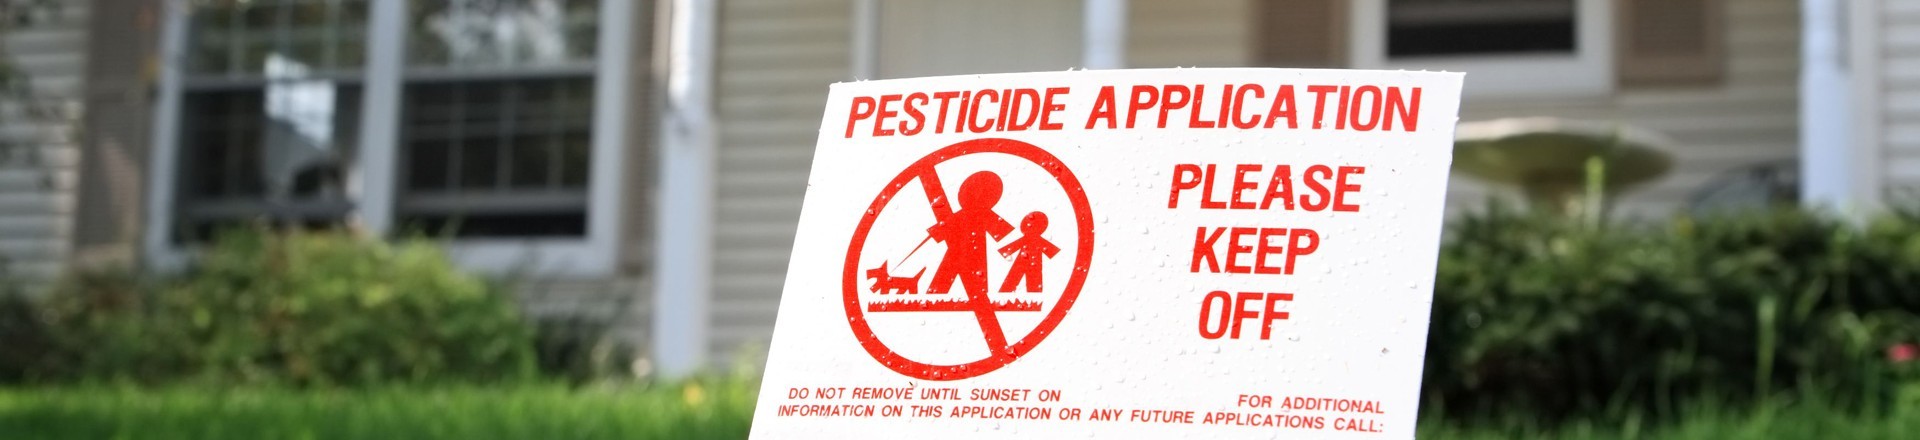 pesticides are among the worst environmental toxins